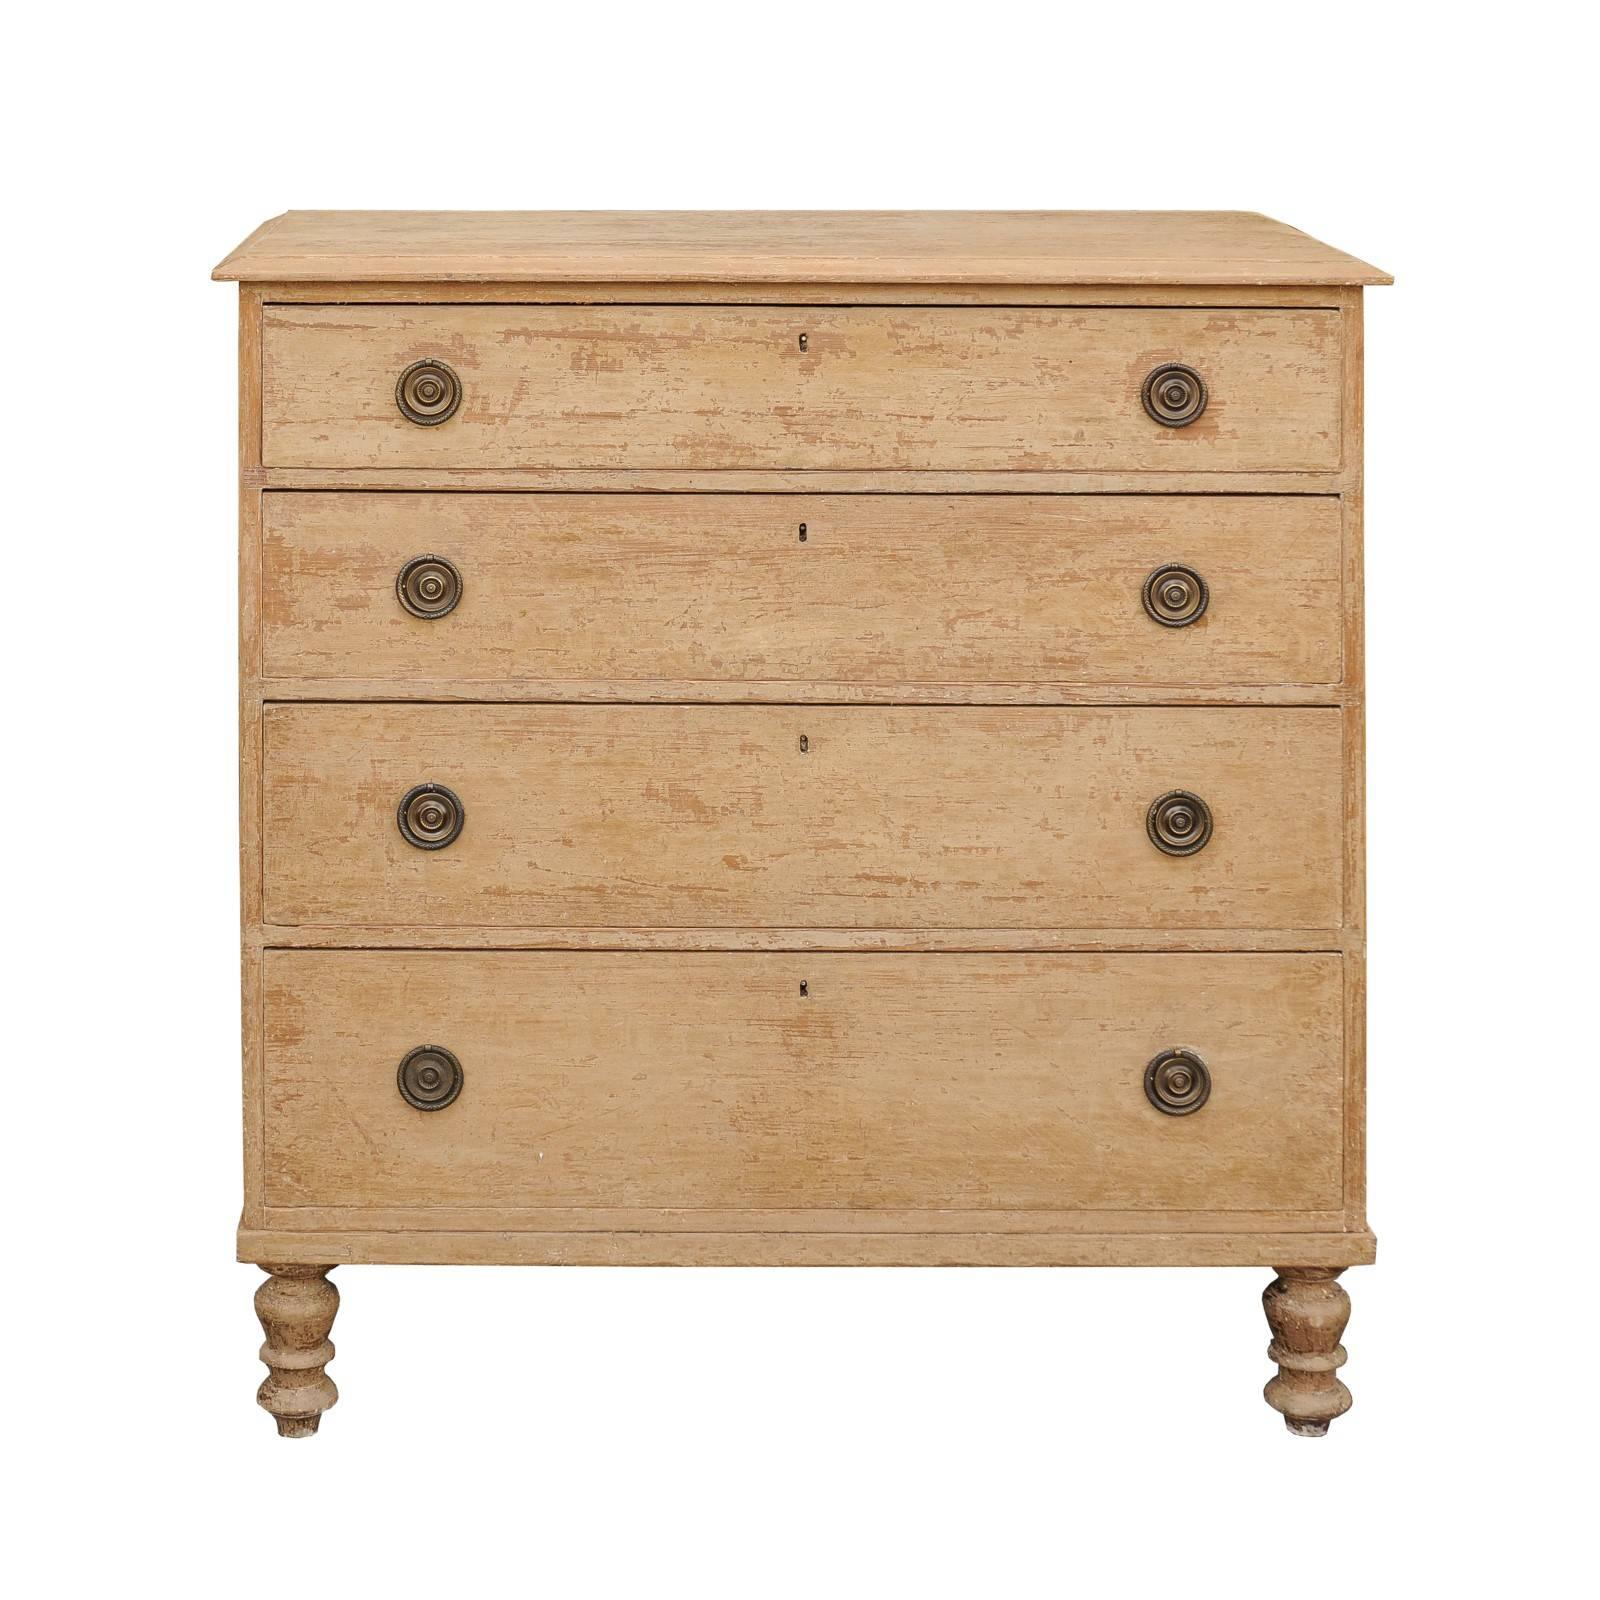 English George III Style Four-Drawer Commode with Original Paint, circa 1850